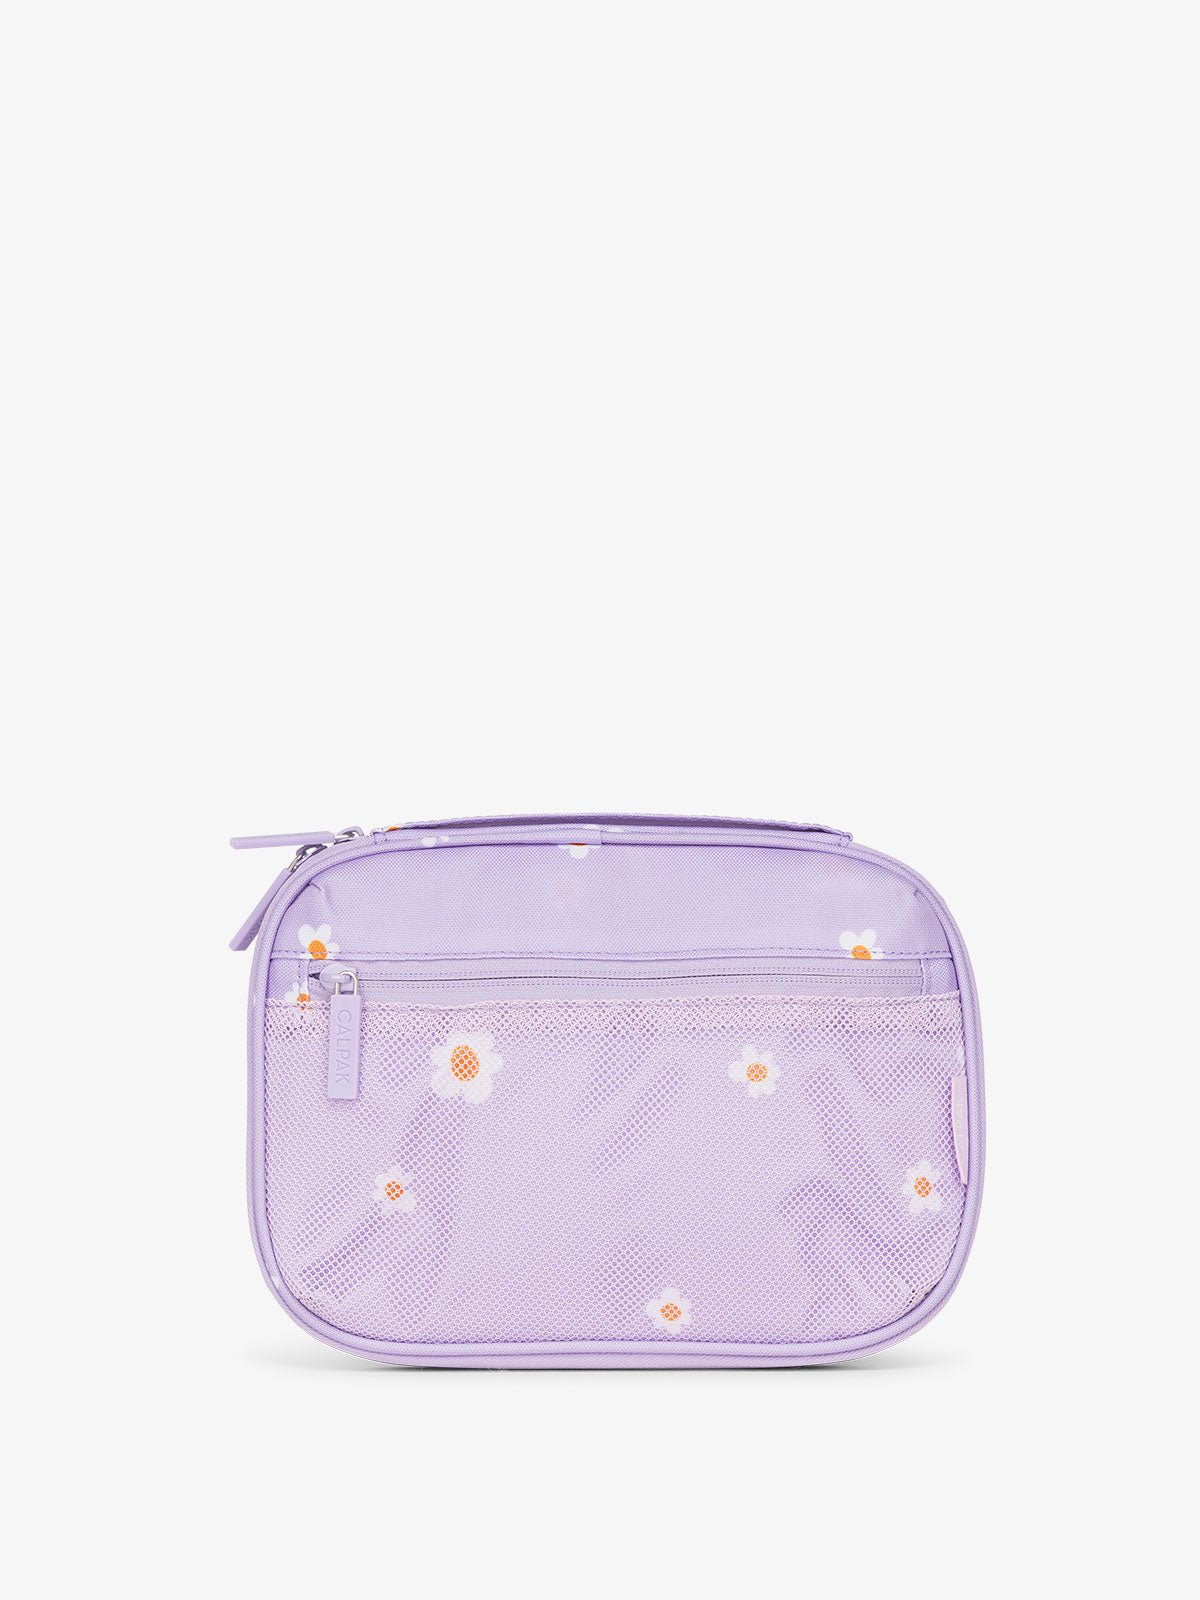 CALPAK Tech organizer with mesh front pocket in orchid fields